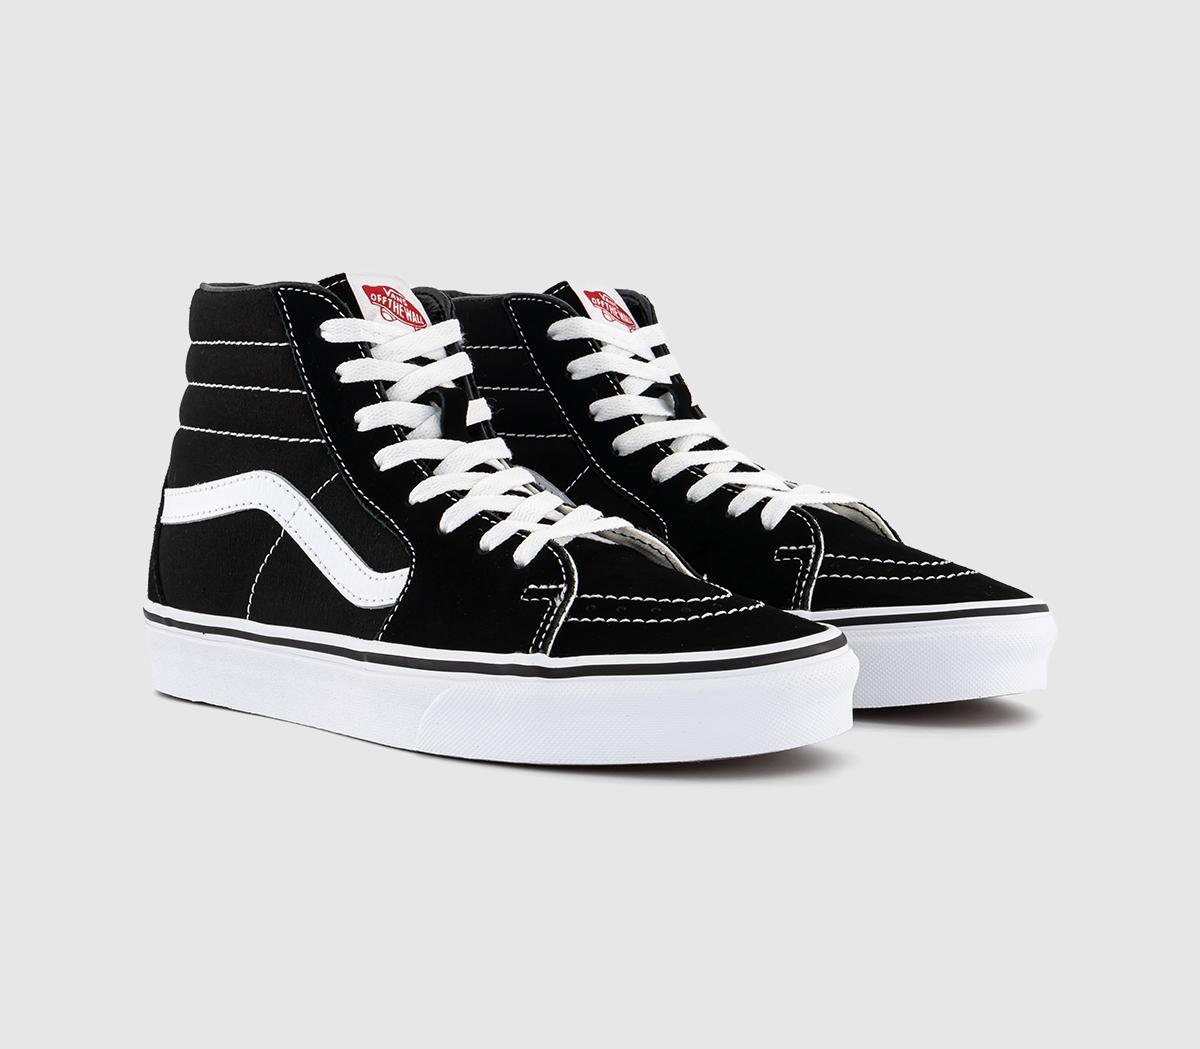 Vans Womens Sk8 Hi Canvas Trainers In Black And White, 7